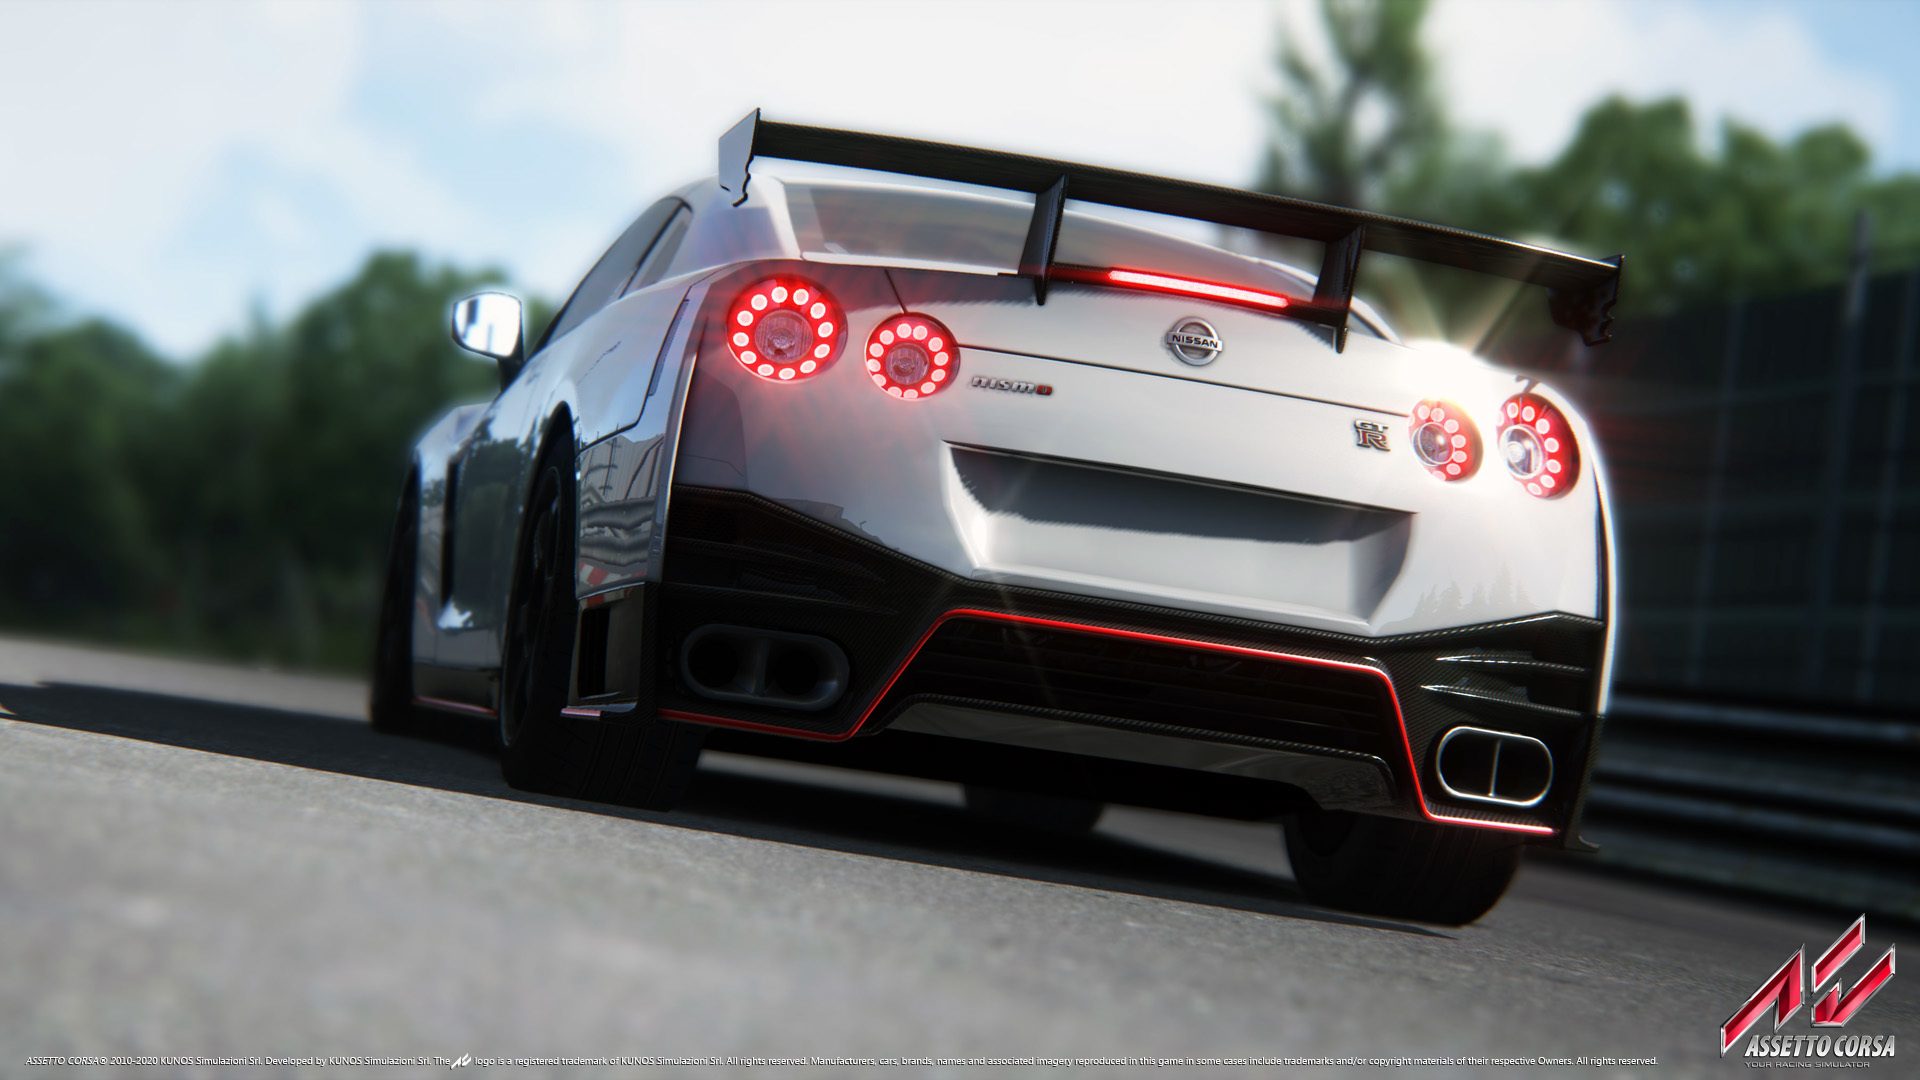 New car pack! : r/assettocorsa